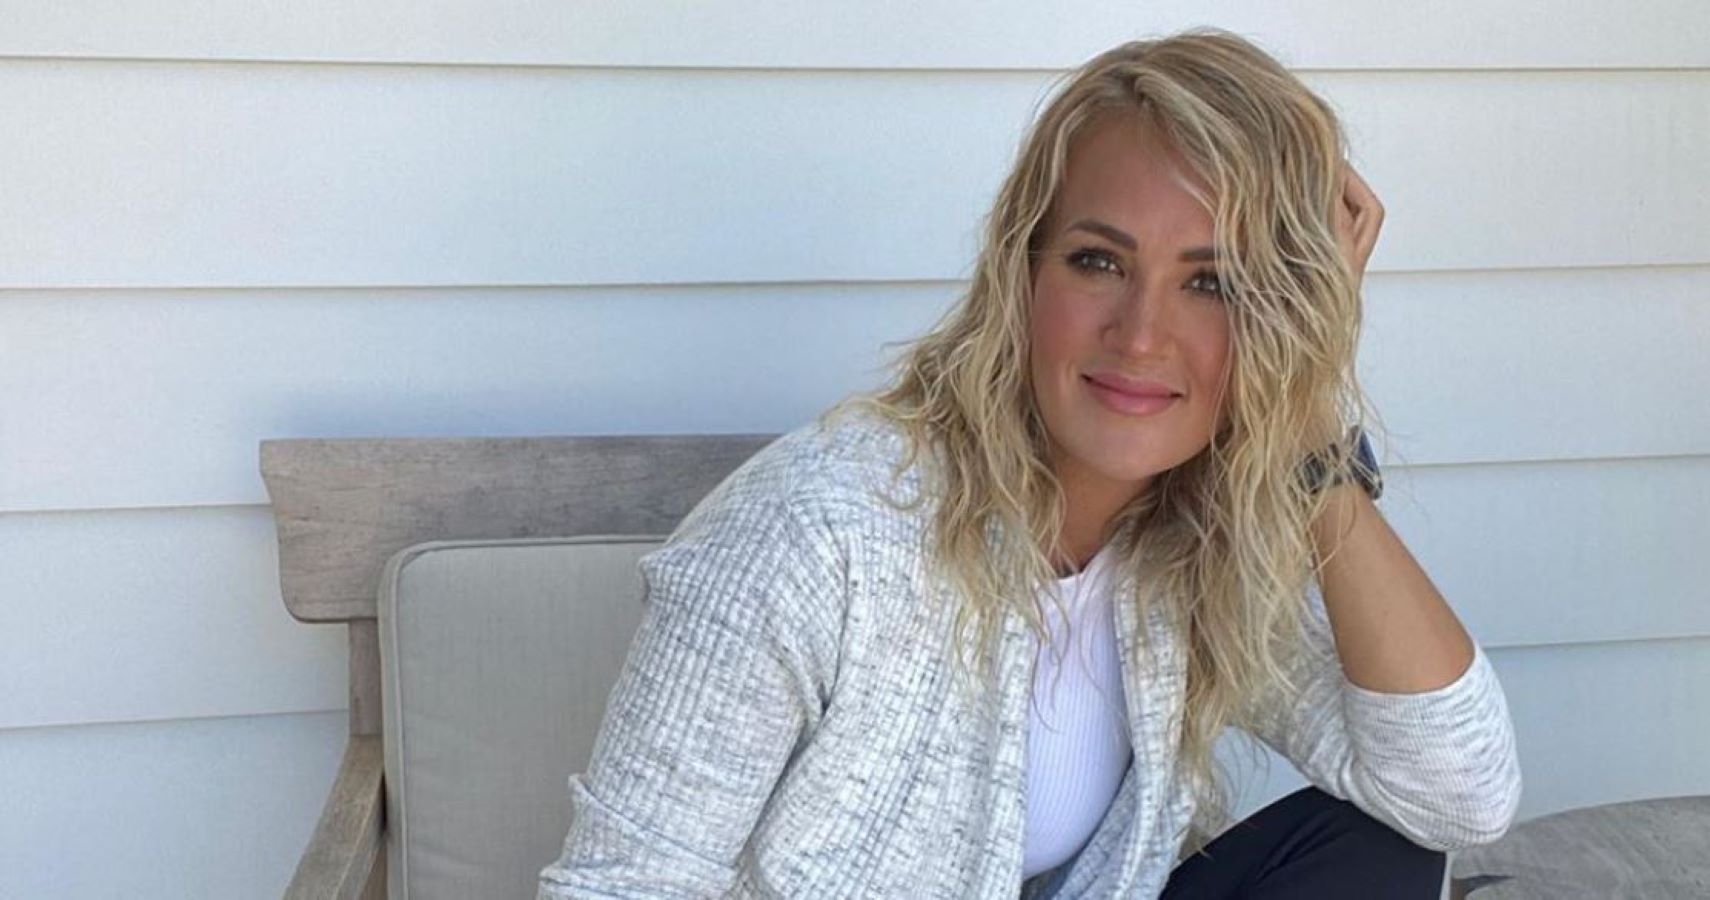 Carrie Underwood is getting to know her sons better during quarantine